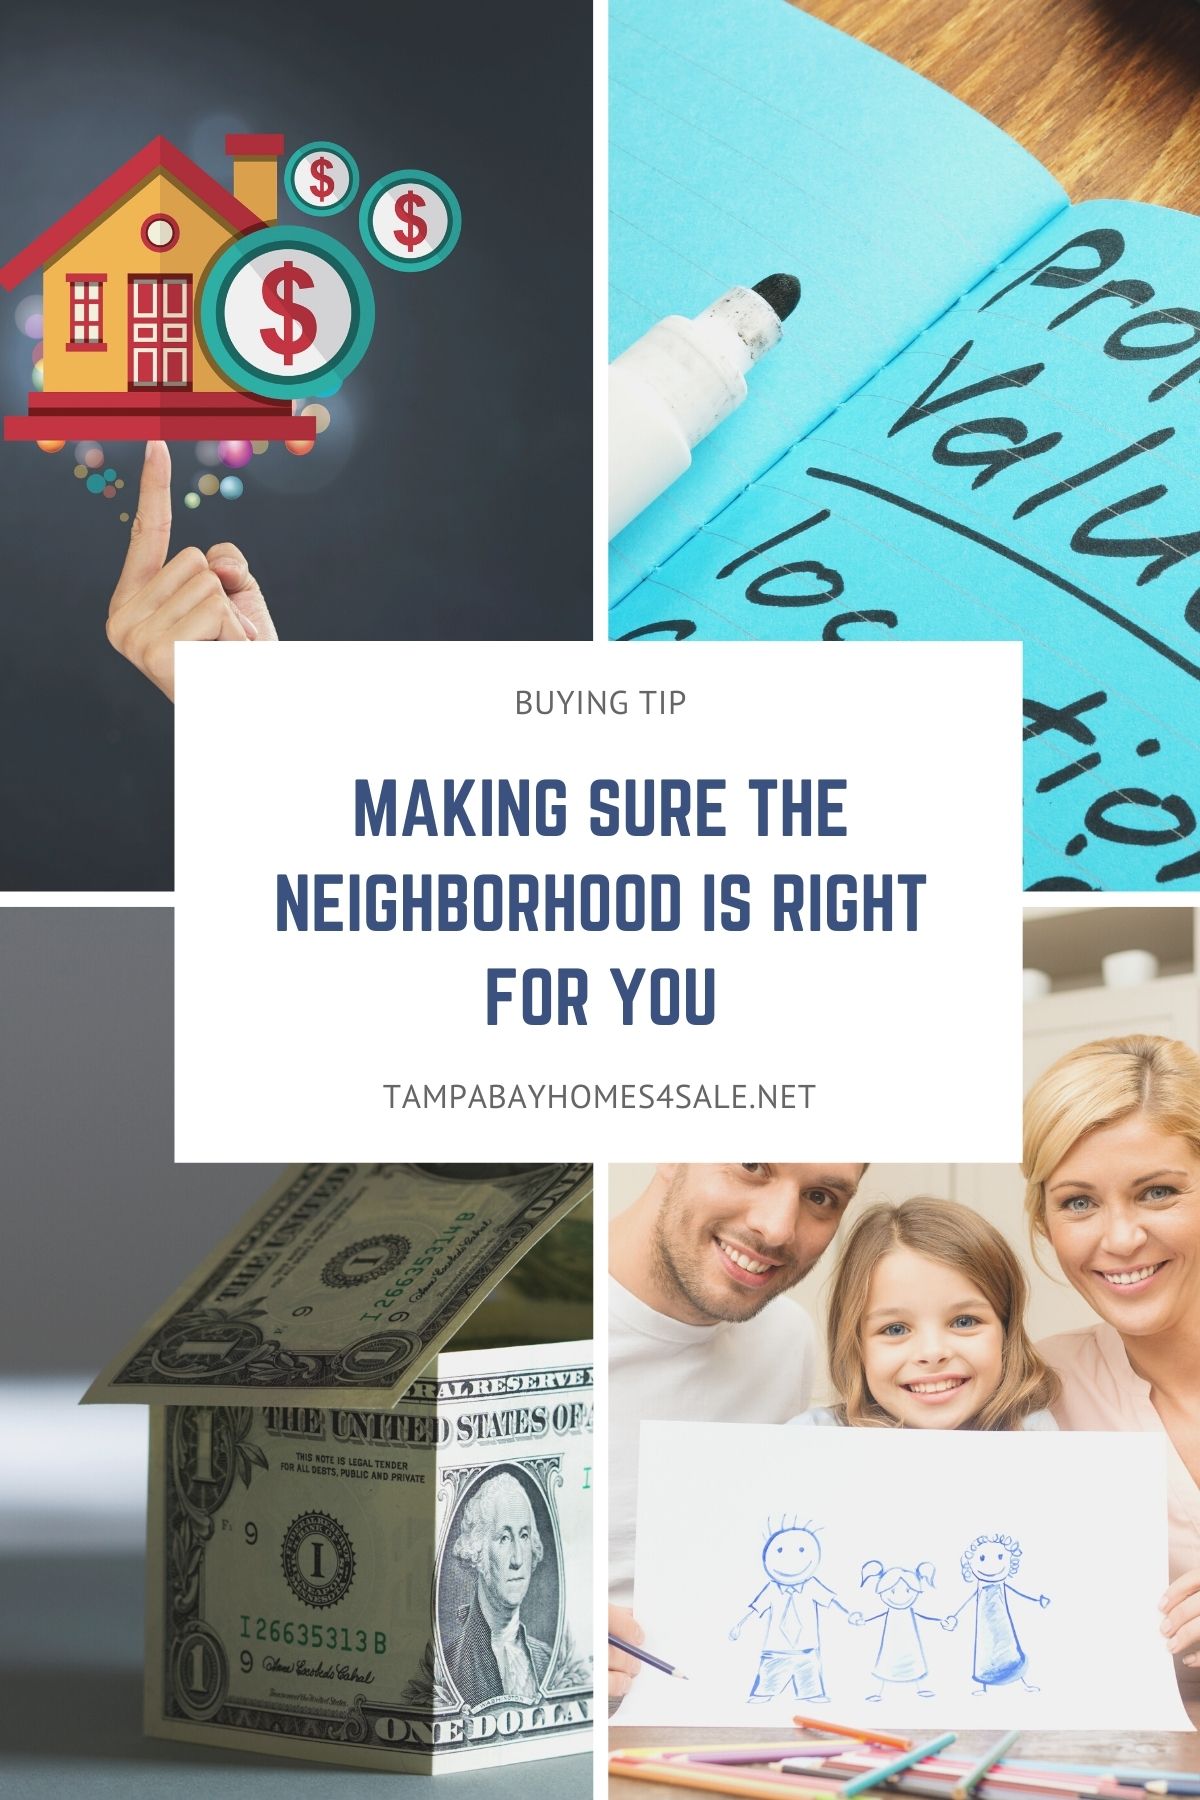 Buying Tip: Making sure the Neighborhood is right for you